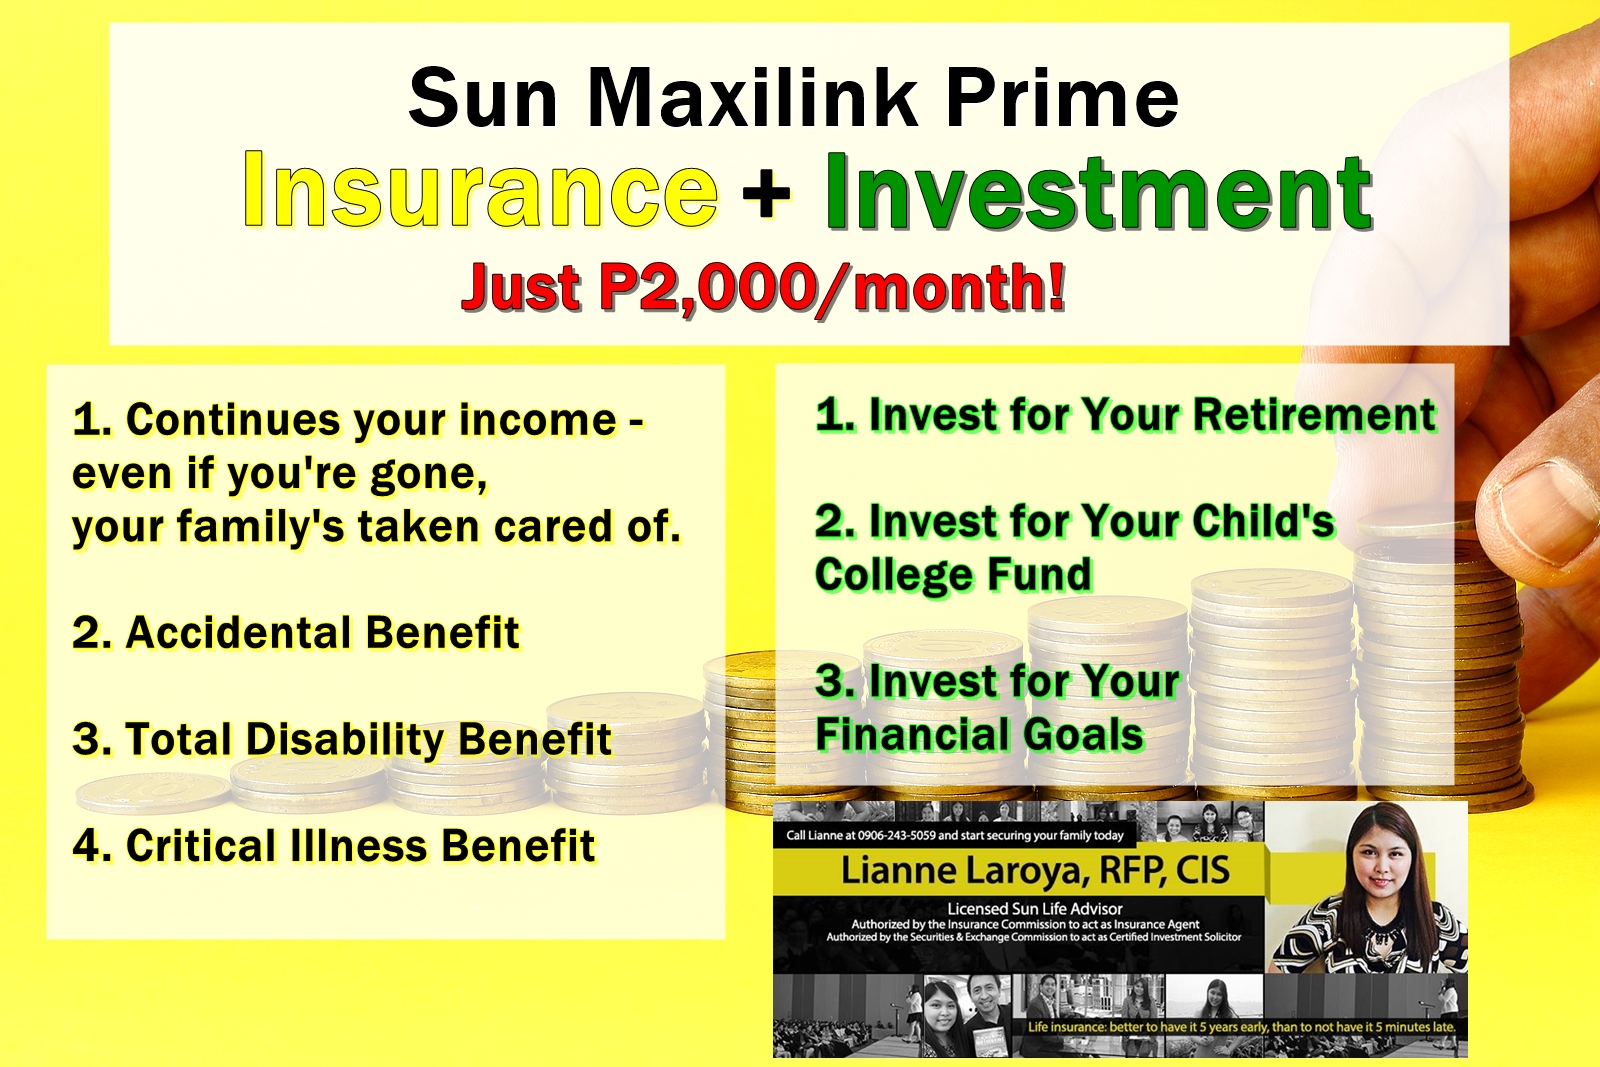 This blog post is for you if you re interested in ting a Sun Maxilink Prime plan for yourself and your family